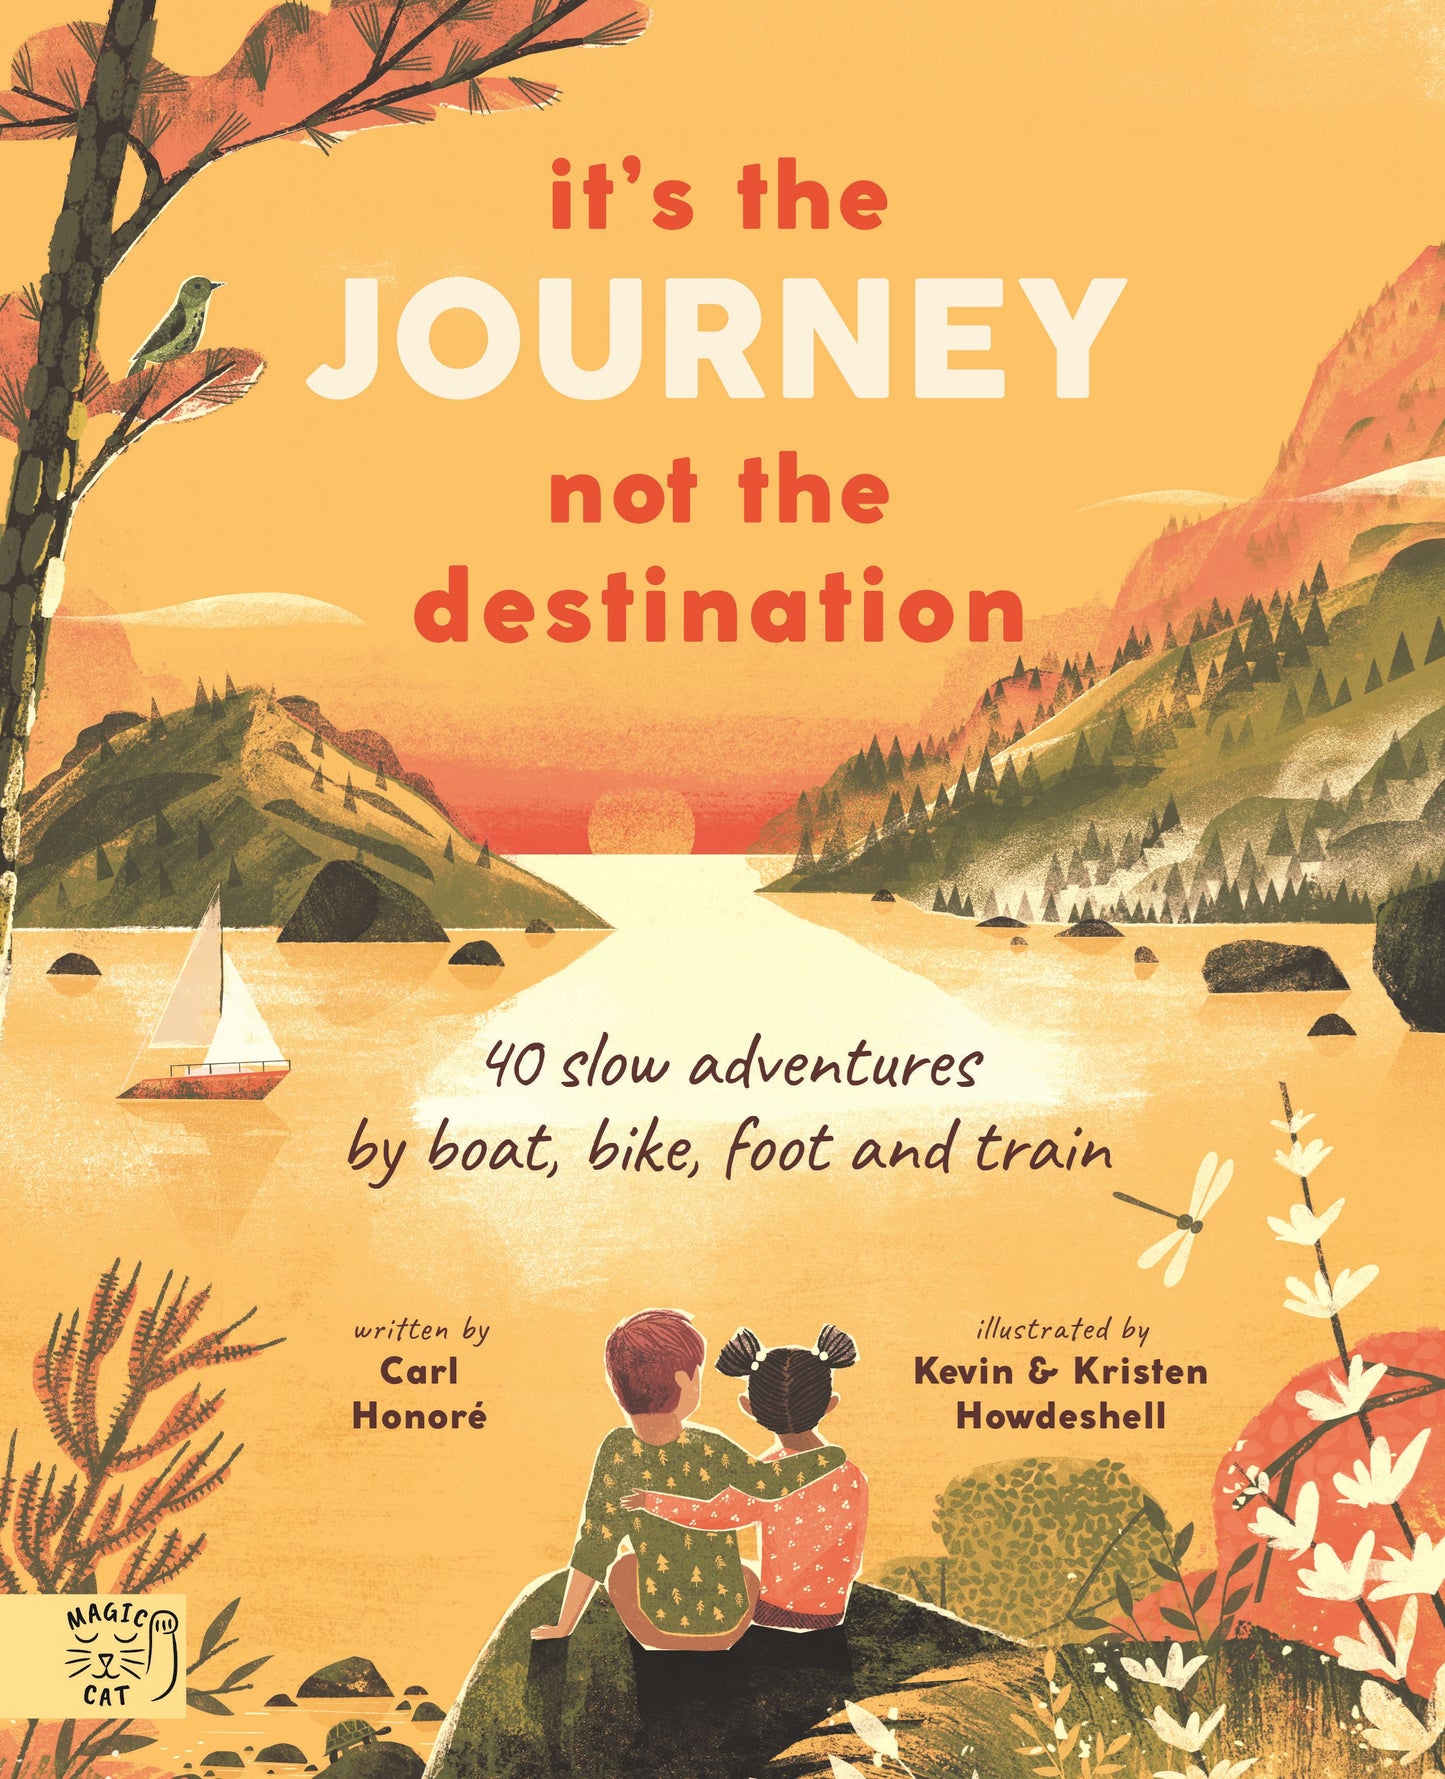 It’s not the journey, it’s the Destination, Carl Honore